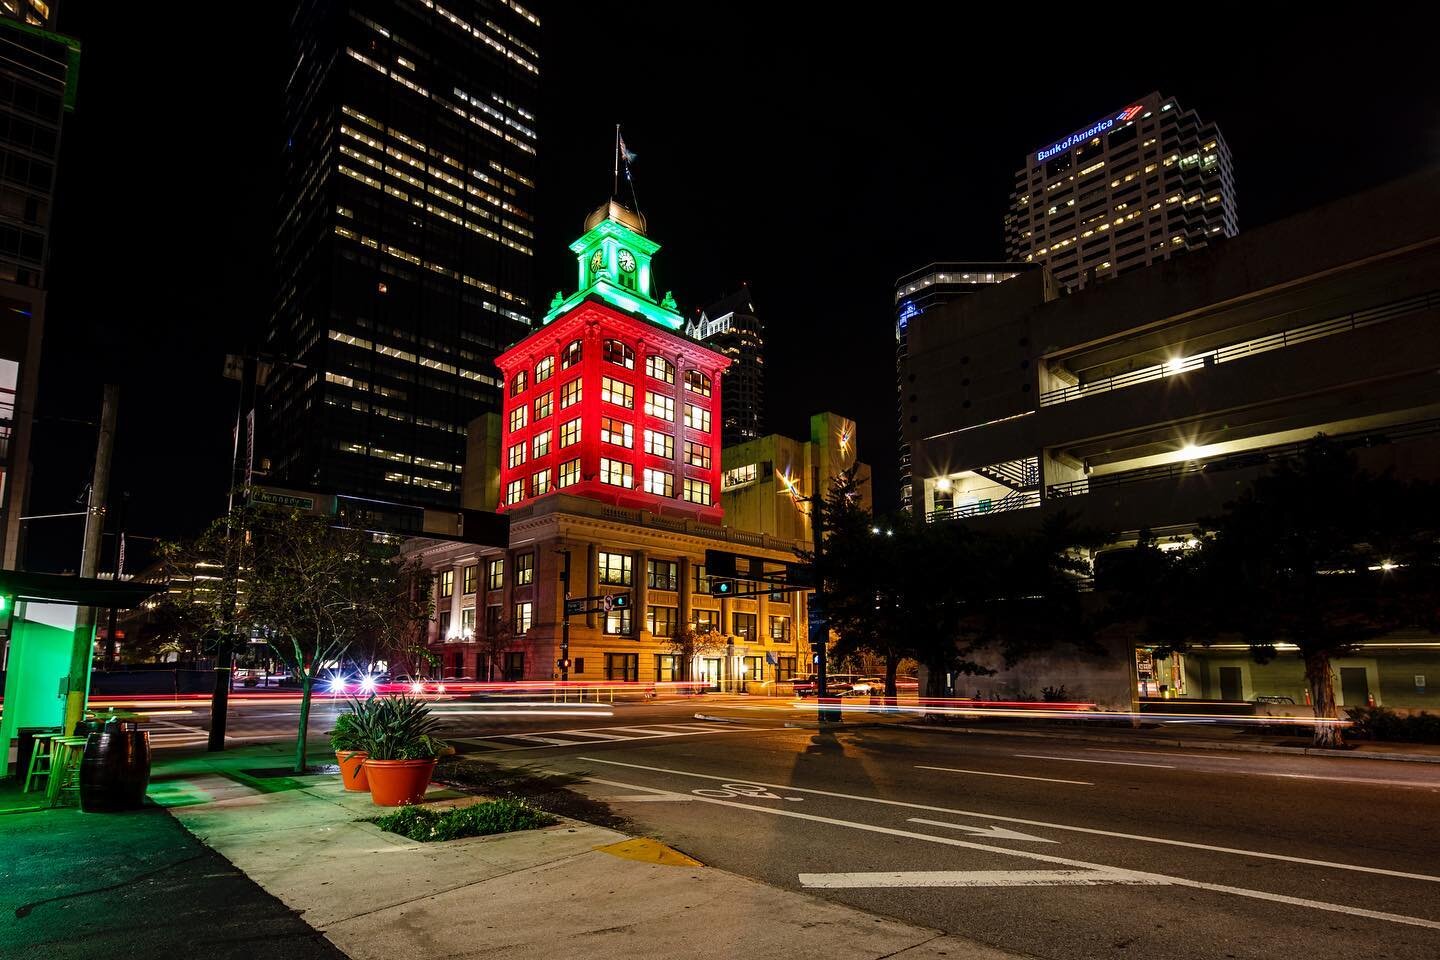 Happy Holidays from beautiful Tampa!! Stay warm and safe! 
.
.
.
.
.
.
#tampa #tampabay #downtown #downtowntampa #happyholidays #christmas #christmaslights #courthouse #night #nightphotography #florida #floridaphotographer #fassbendercreative #light 